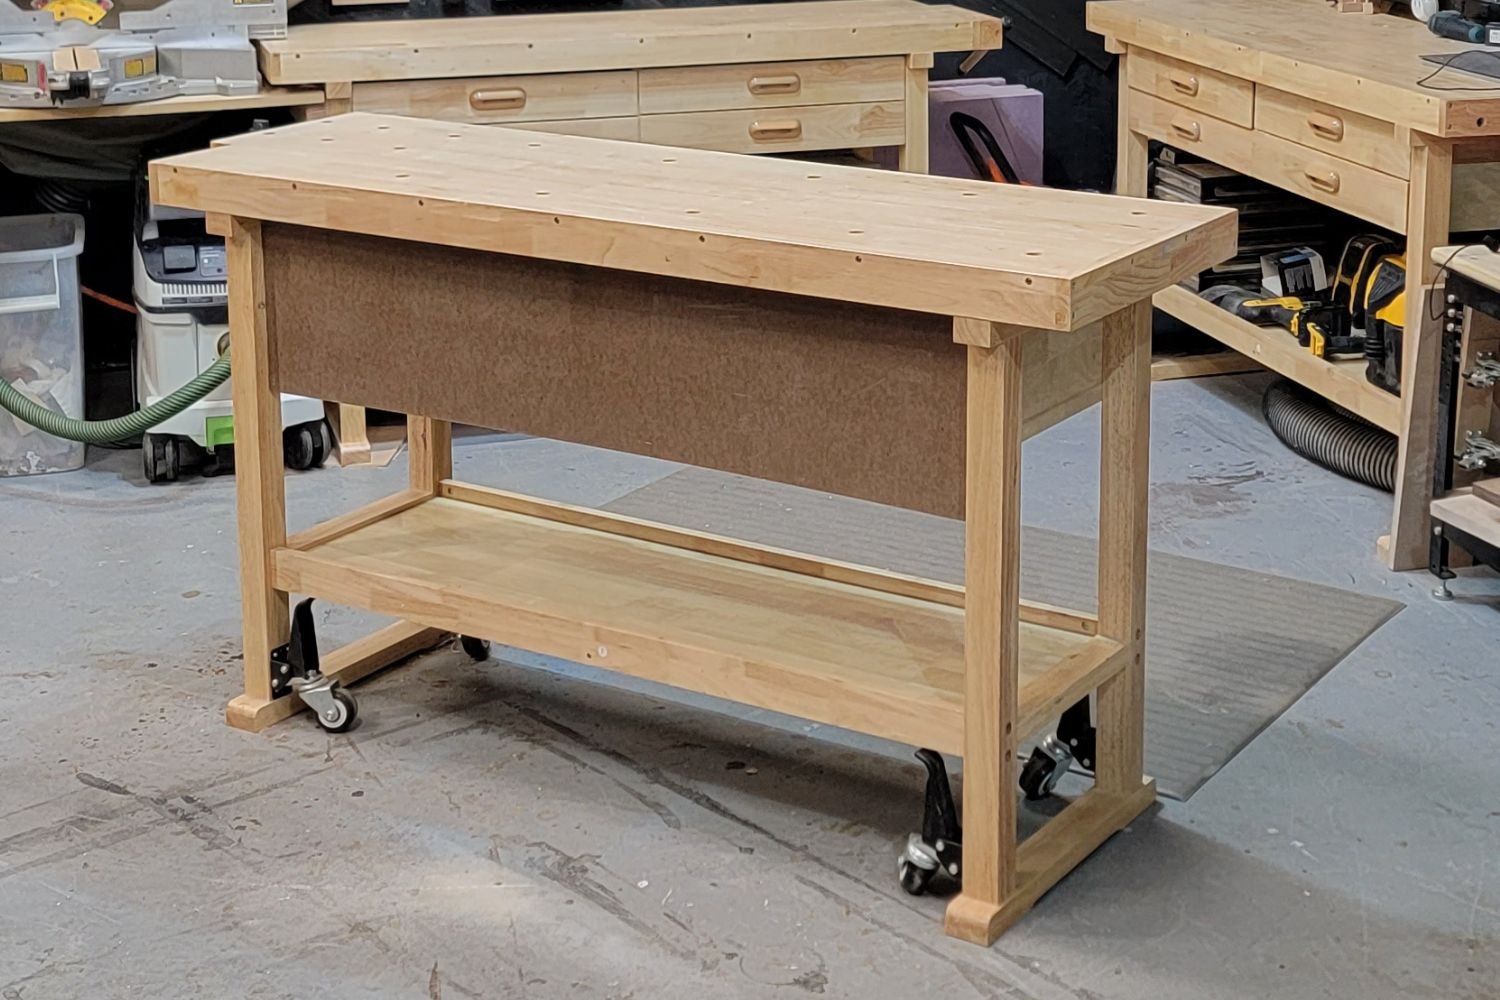 How High Should A Woodworking Bench Be